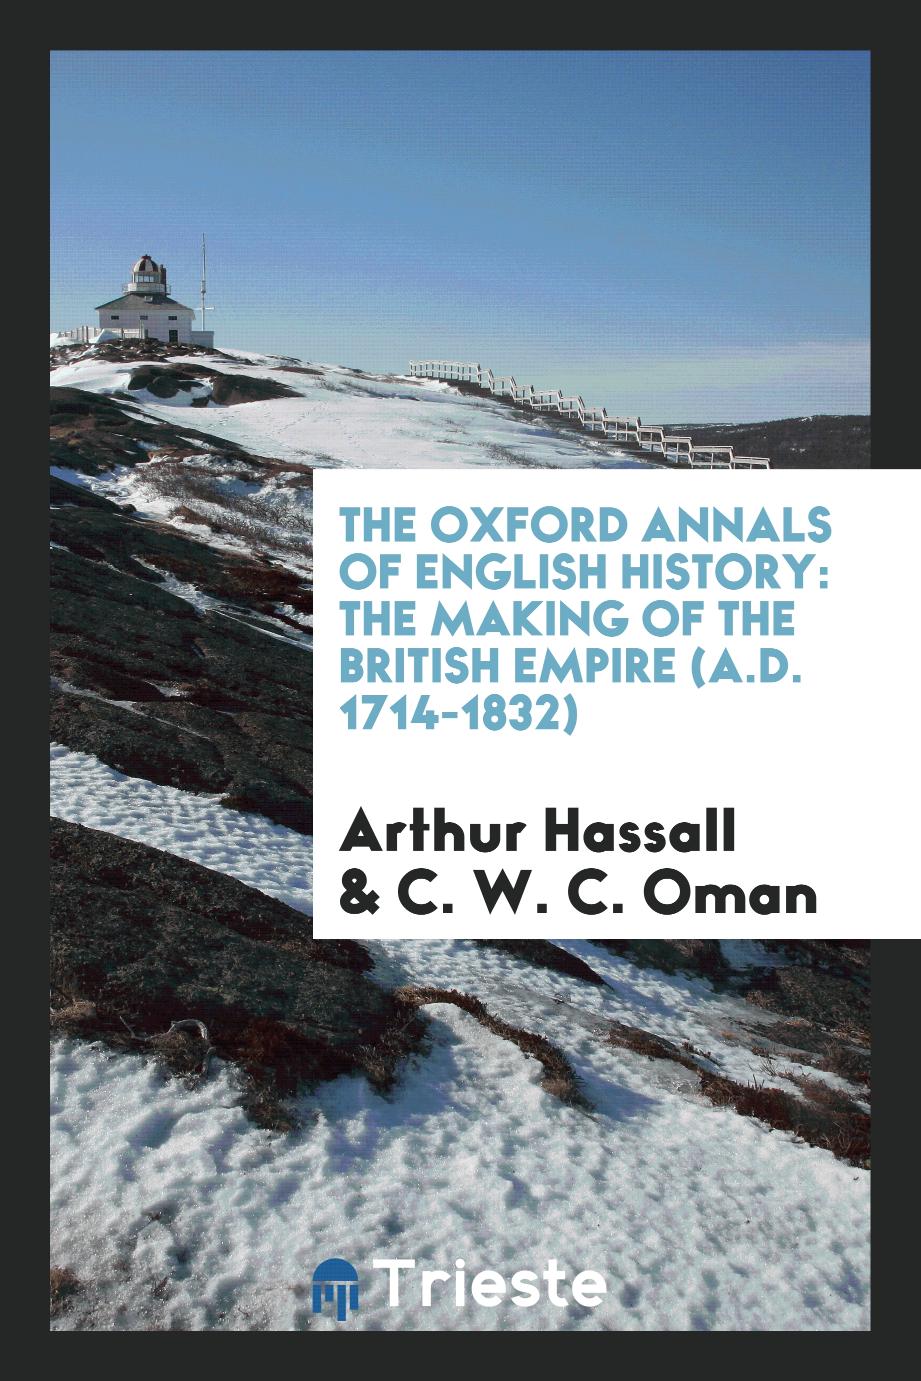 The Oxford Annals of English History: The Making of the British Empire (A.D. 1714-1832)